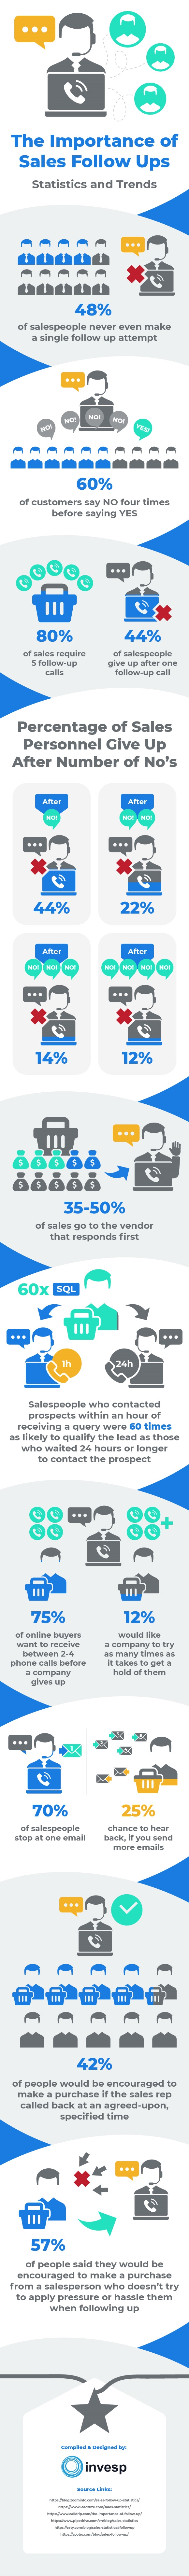 Why Sales Follow Up is Critical [Infographic]